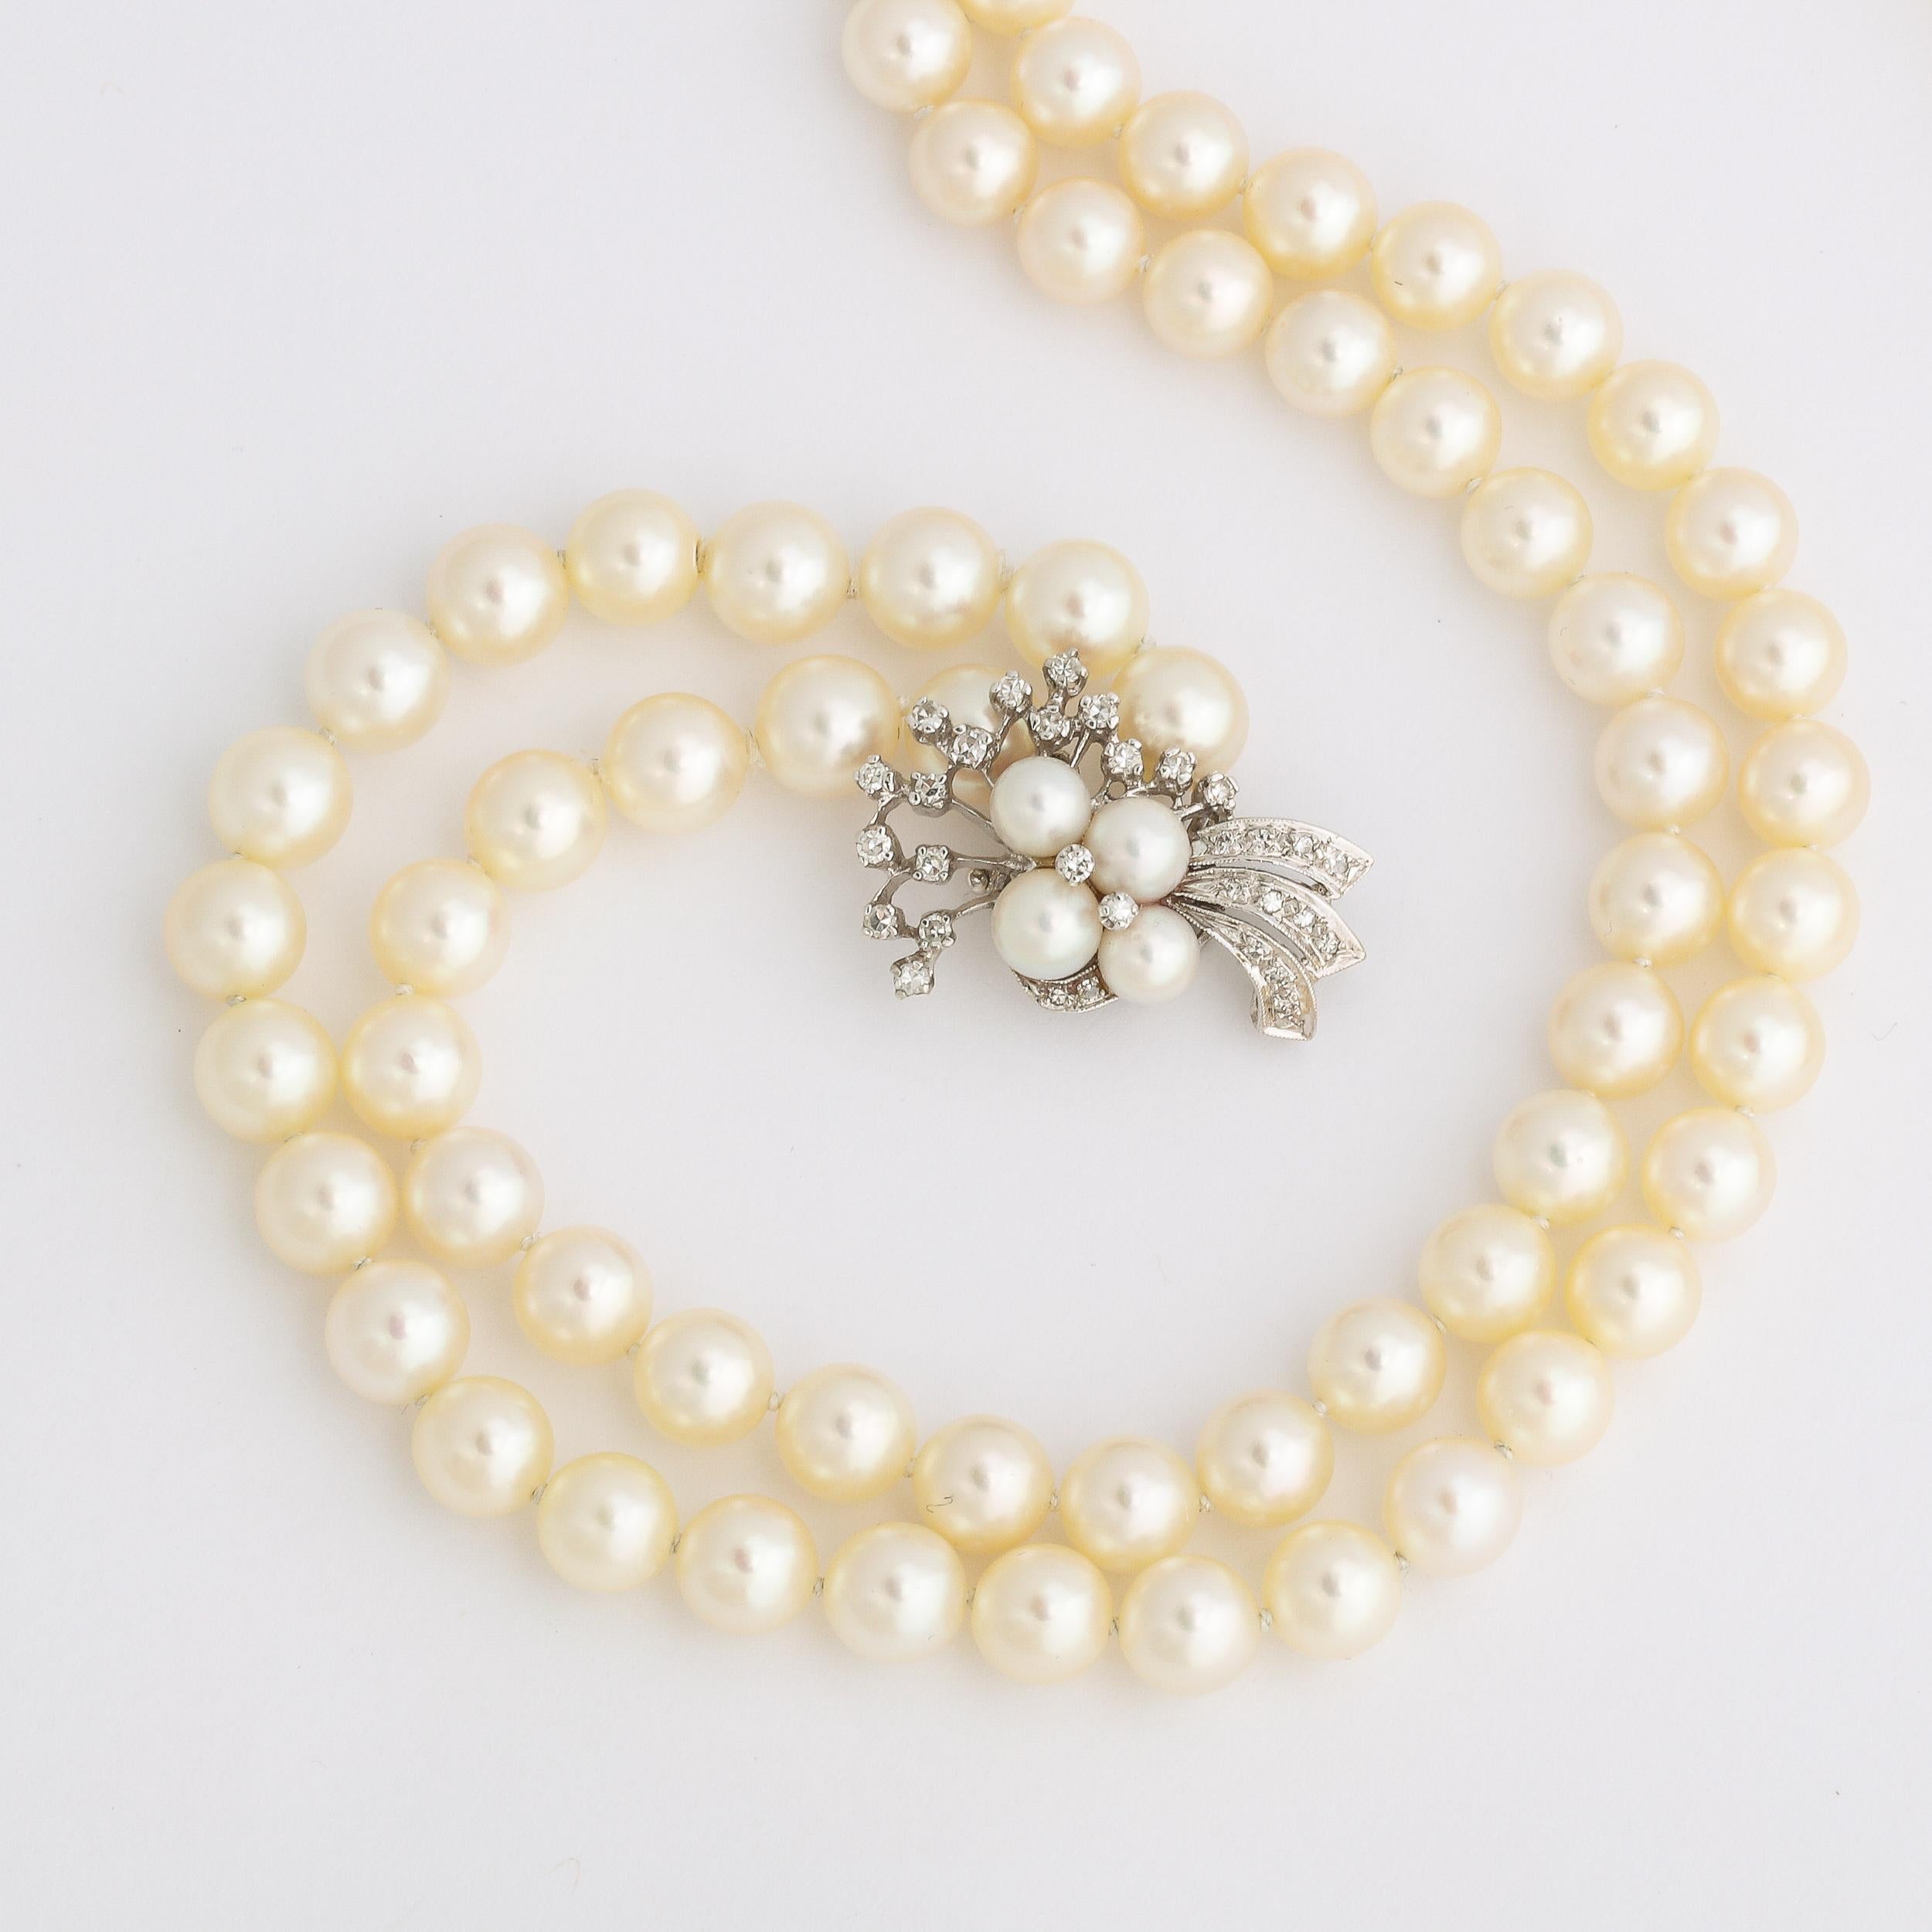 Double Strand Pearl Necklace with A White Gold , Diamond & Pearl Clasp For Sale 8